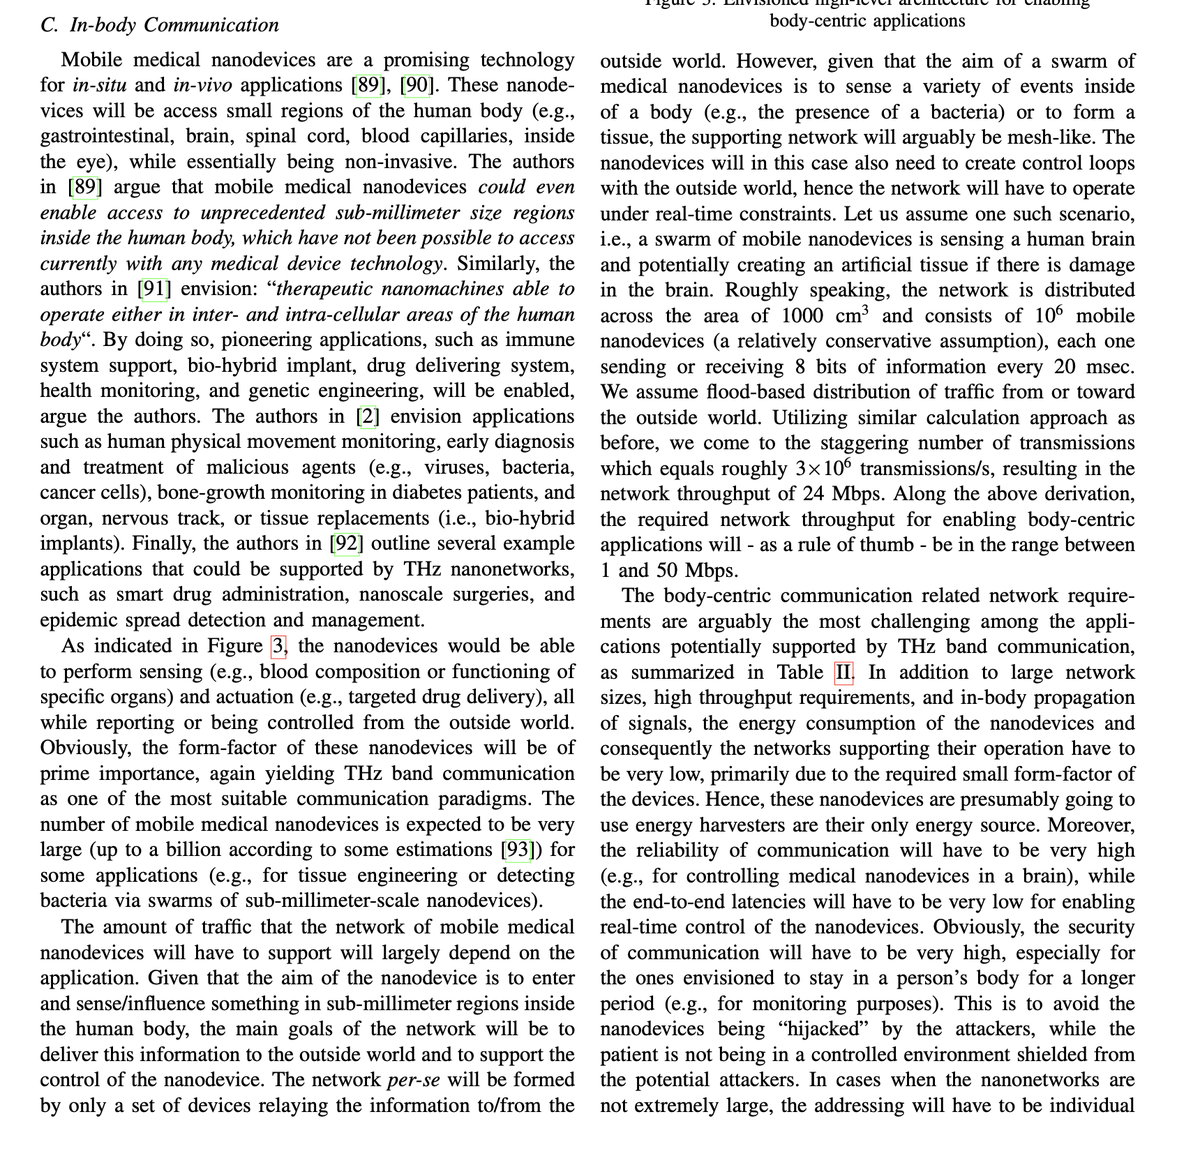 #HumanBodyCommunication 

Survey on Terahertz Nanocommunication and Networking: A Top-Down Perspective

arxiv.org/pdf/1909.05703…